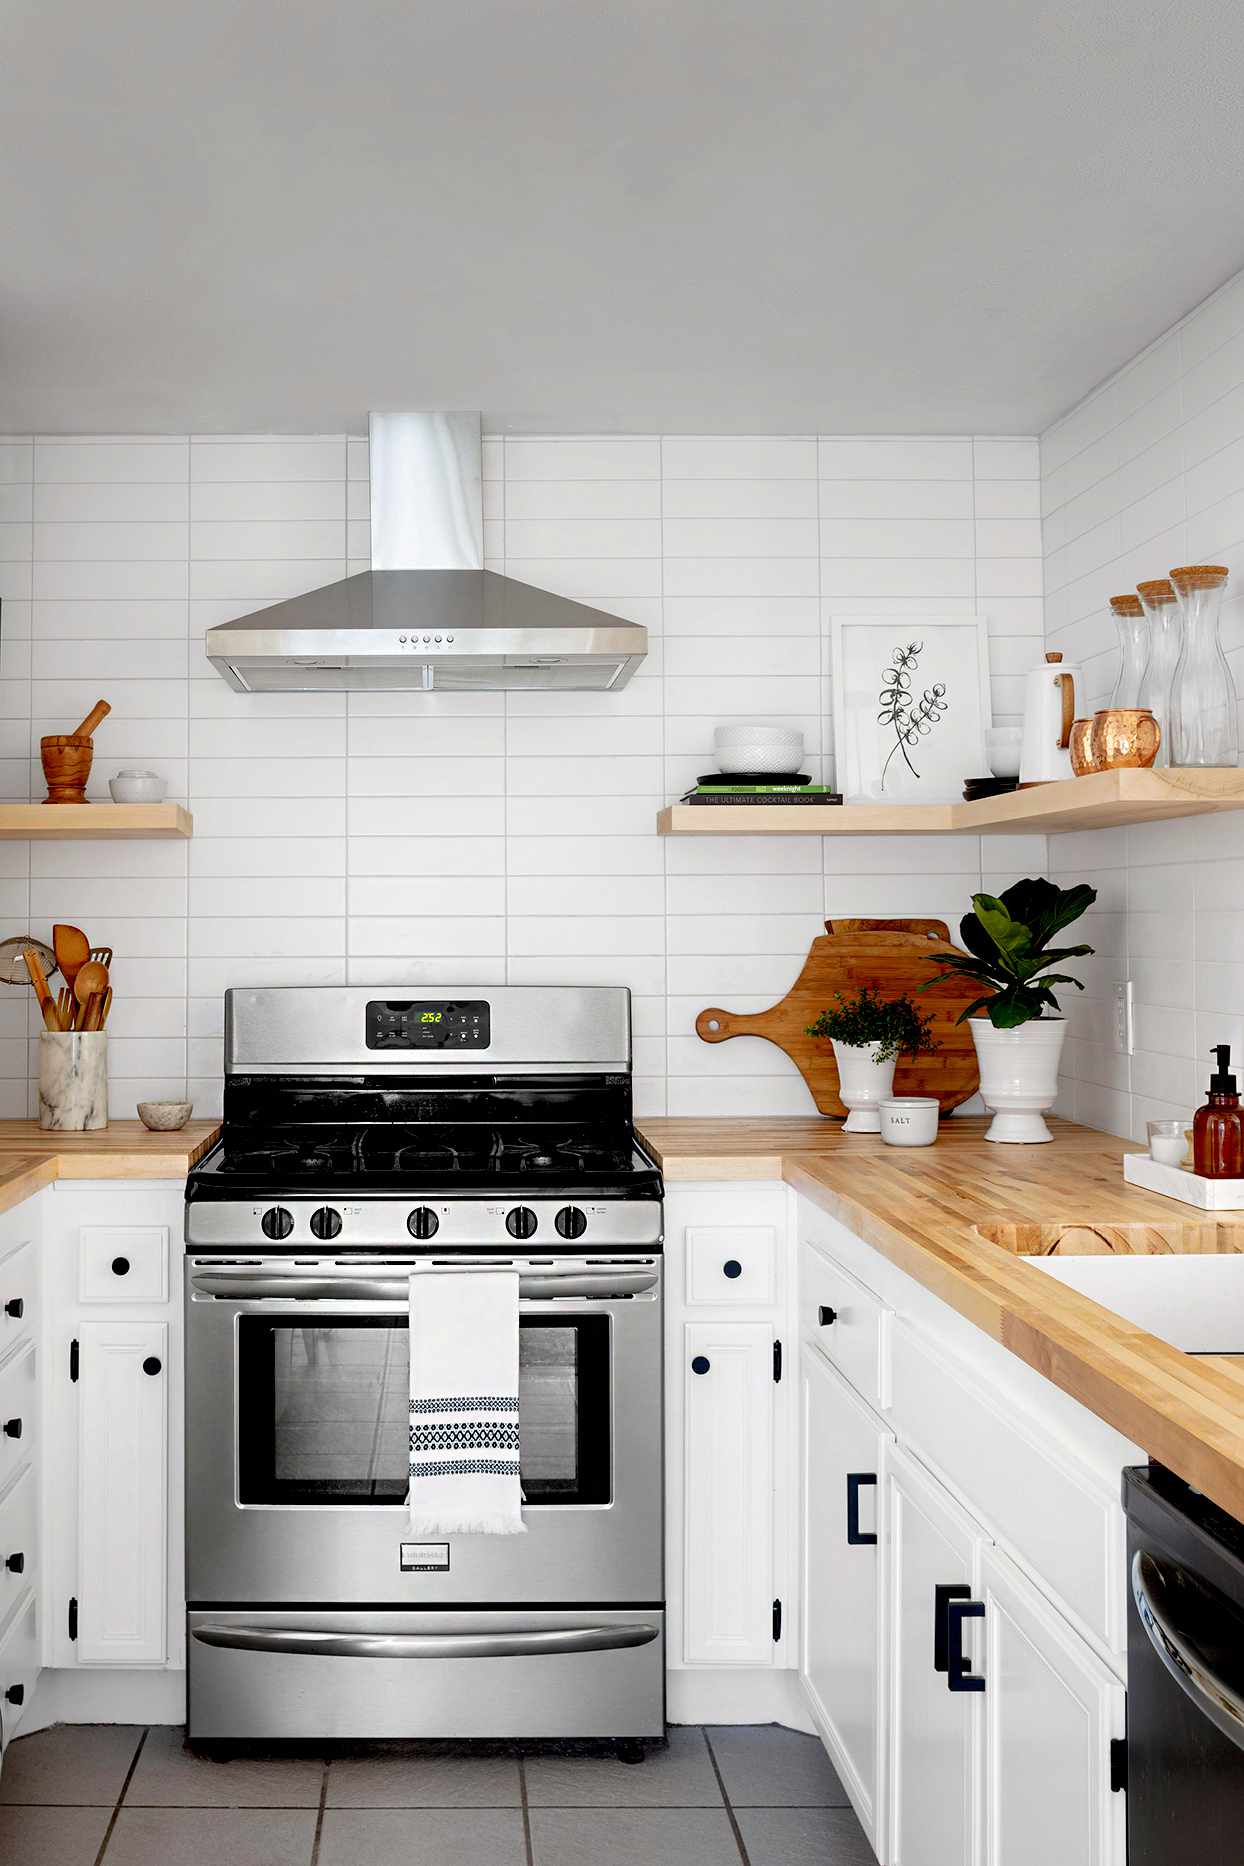 Our Favorite Budget Kitchen Remodeling, How Much Money Does It Cost To Remodel A Small Kitchen